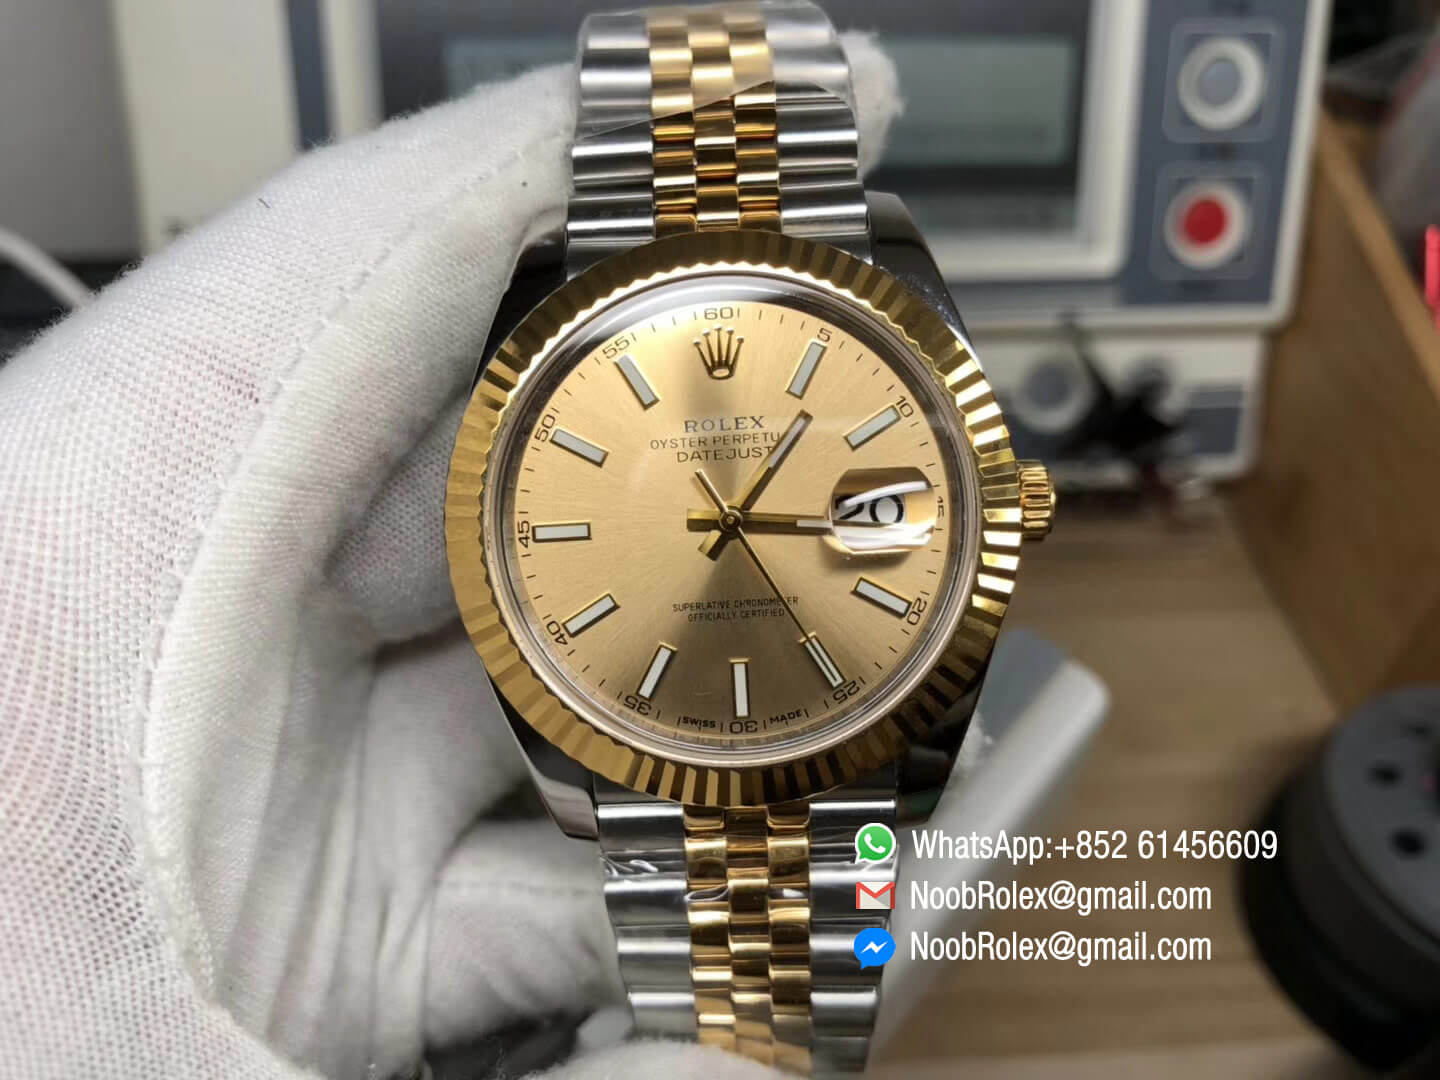 DateJust 41 126303 Noob Factory Real 